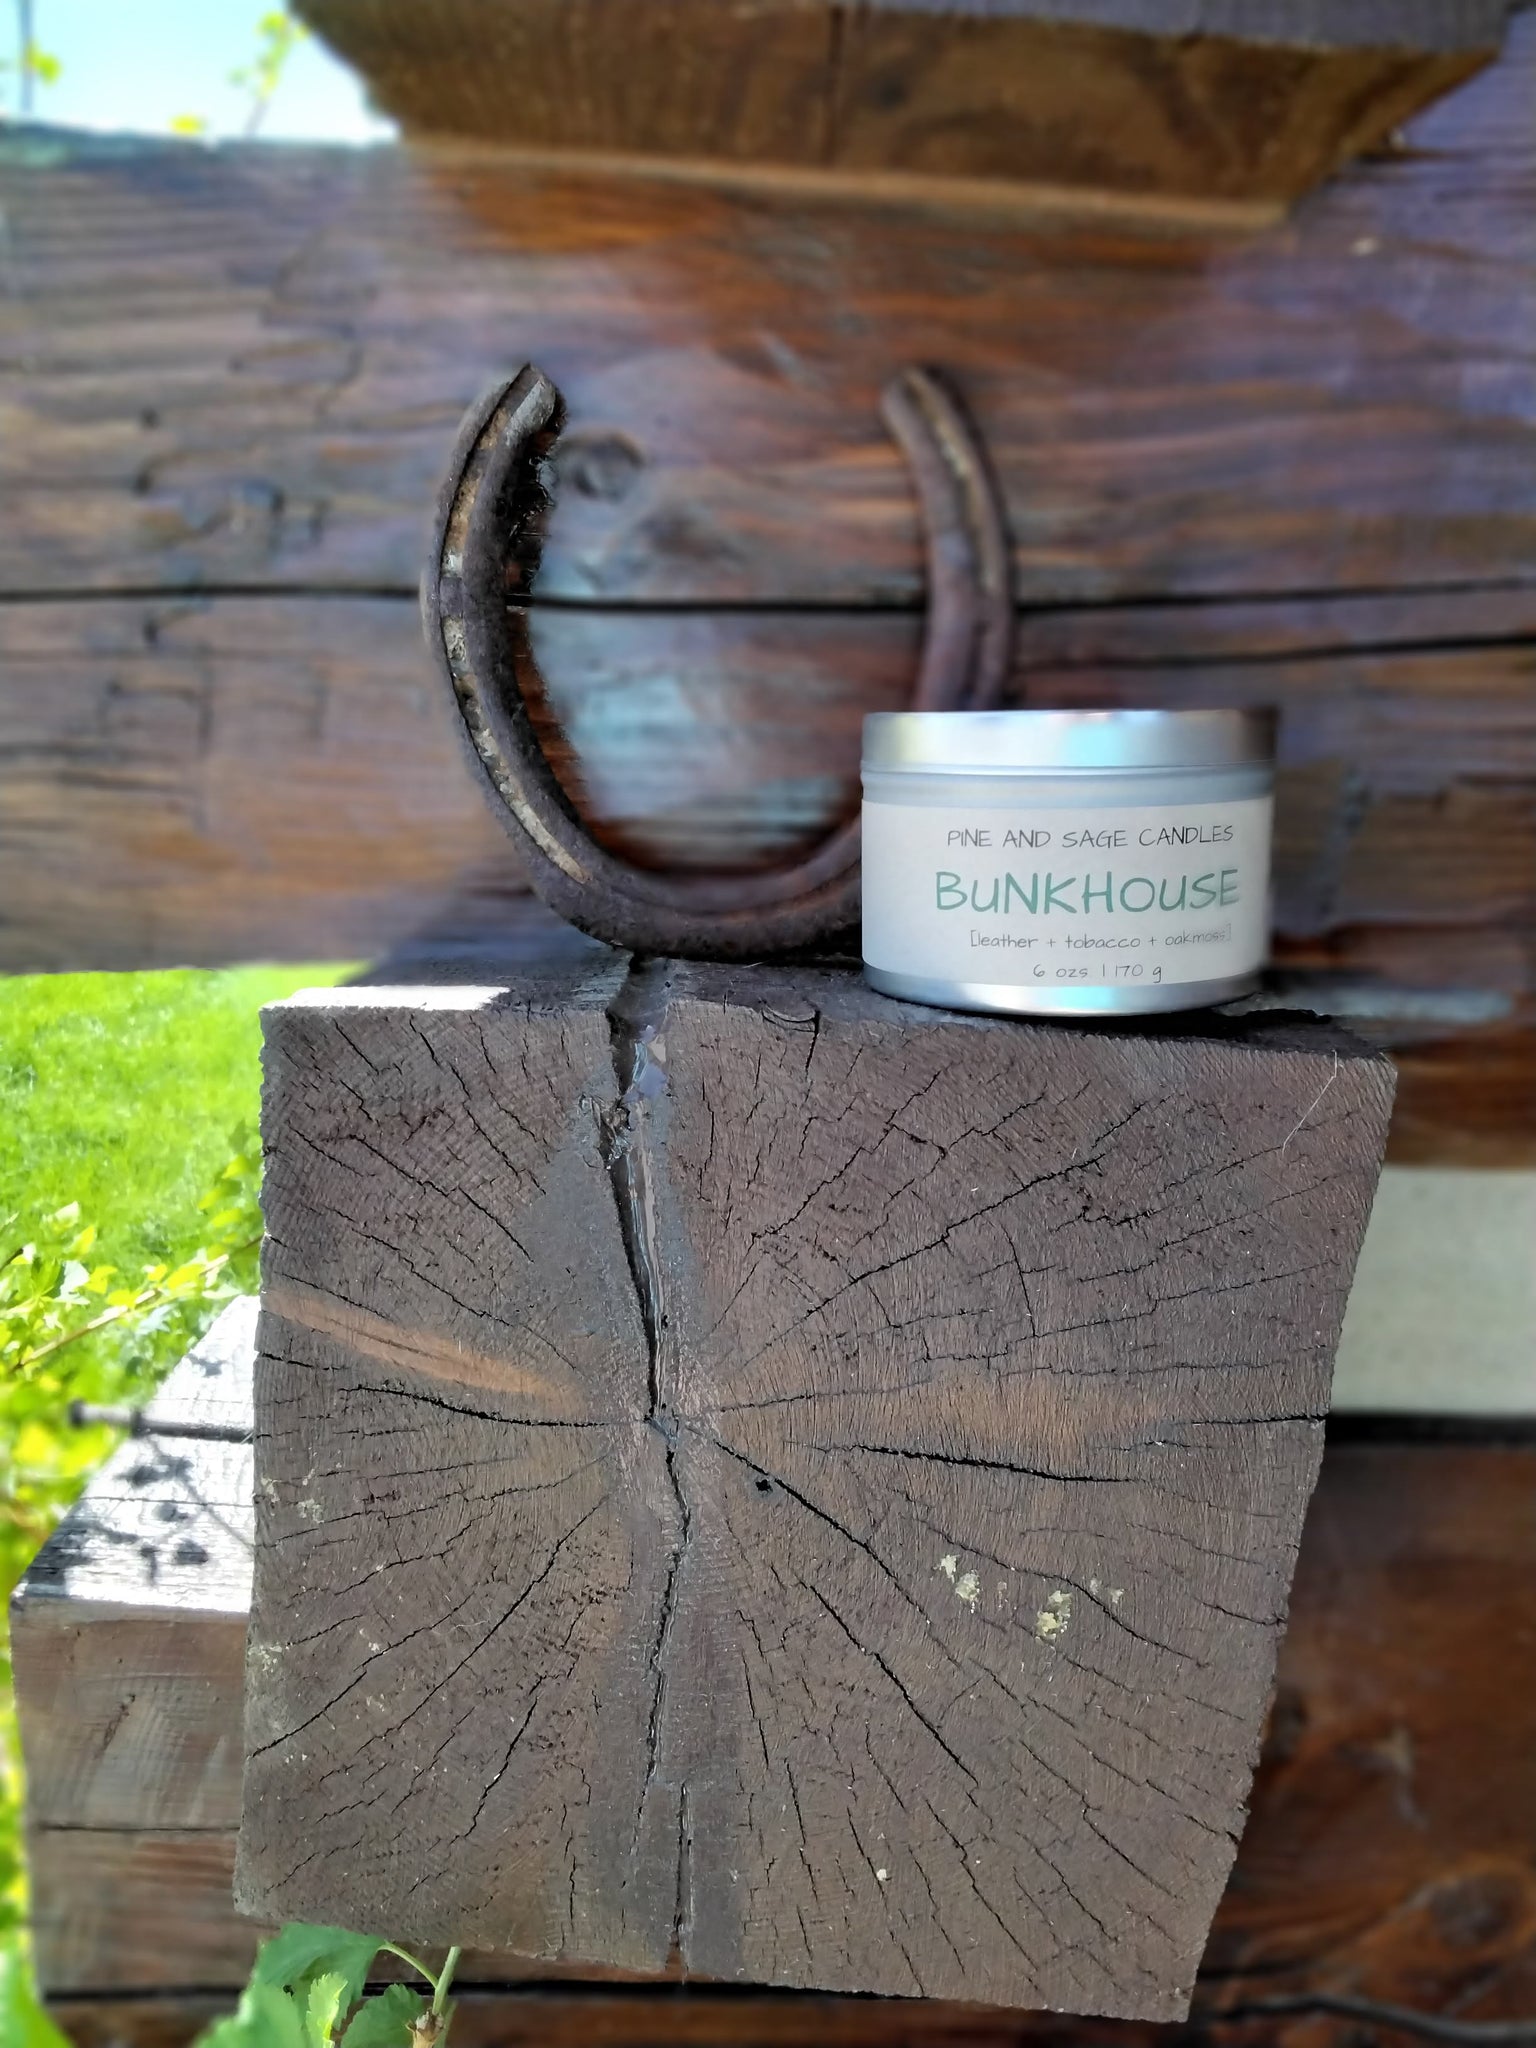 Bunkhouse – Pine and Sage Candles